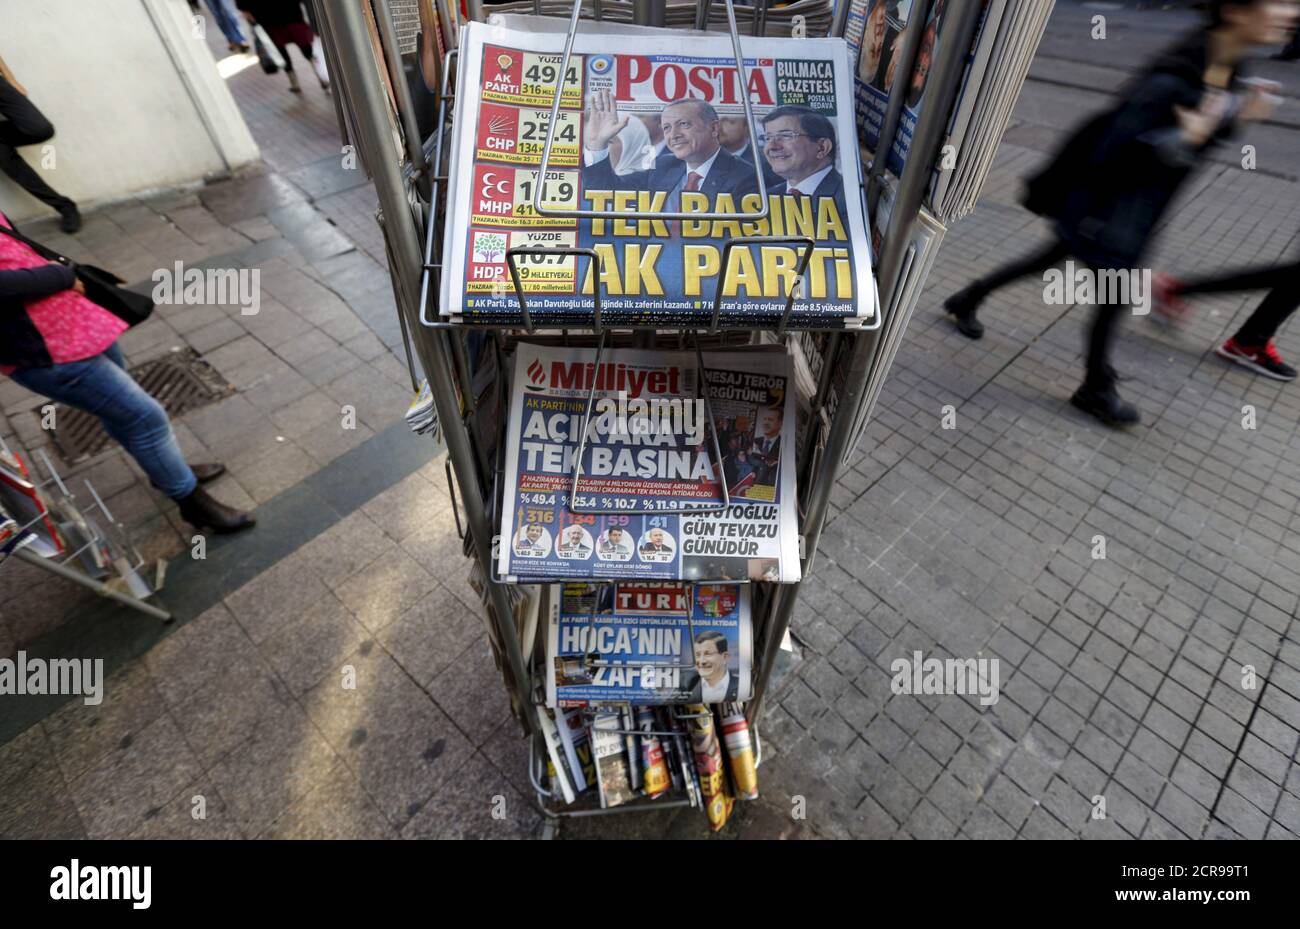 People walk past by a kiosk in central Istanbul, Turkey November 2, 2015. A jubilant President Tayyip Erdogan on Monday cast the return of Turkey's Islamist-rooted AK Party to single-party rule as a vote for stability that the world must respect, but opponents fear it heralds growing authoritarianism and deeper polarisation. The newspaper headline on top reads: 'AK Party on its own' REUTERS/Murad Sezer Stock Photo